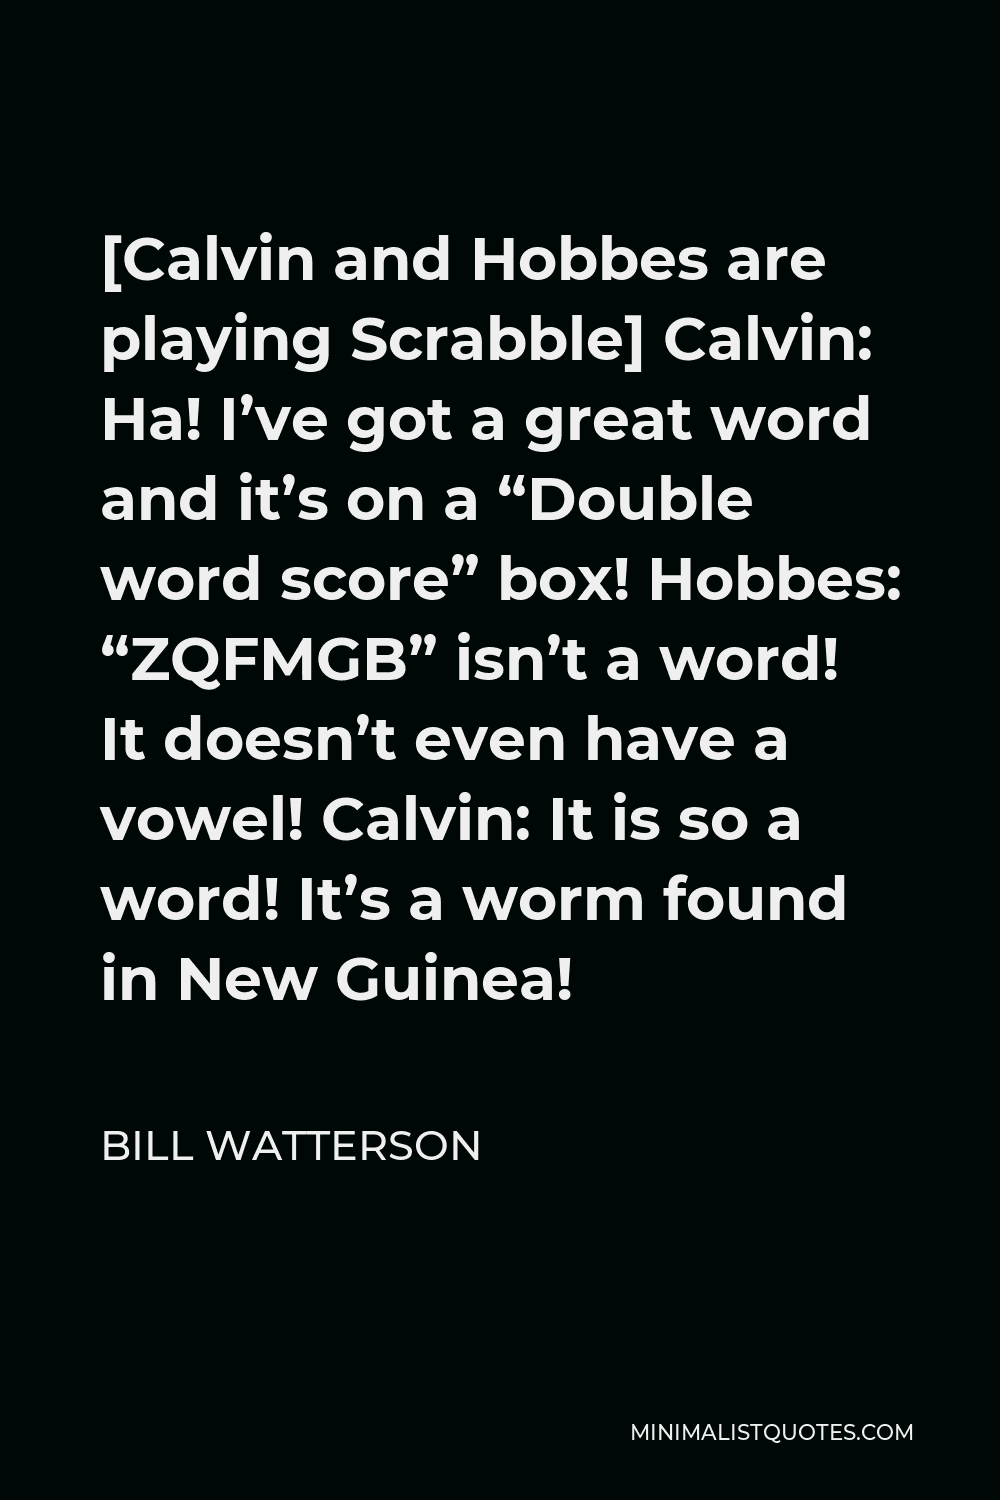 Bill Watterson Quote - [Calvin and Hobbes are playing Scrabble] Calvin: Ha! I’ve got a great word and it’s on a “Double word score” box! Hobbes: “ZQFMGB” isn’t a word! It doesn’t even have a vowel! Calvin: It is so a word! It’s a worm found in New Guinea!